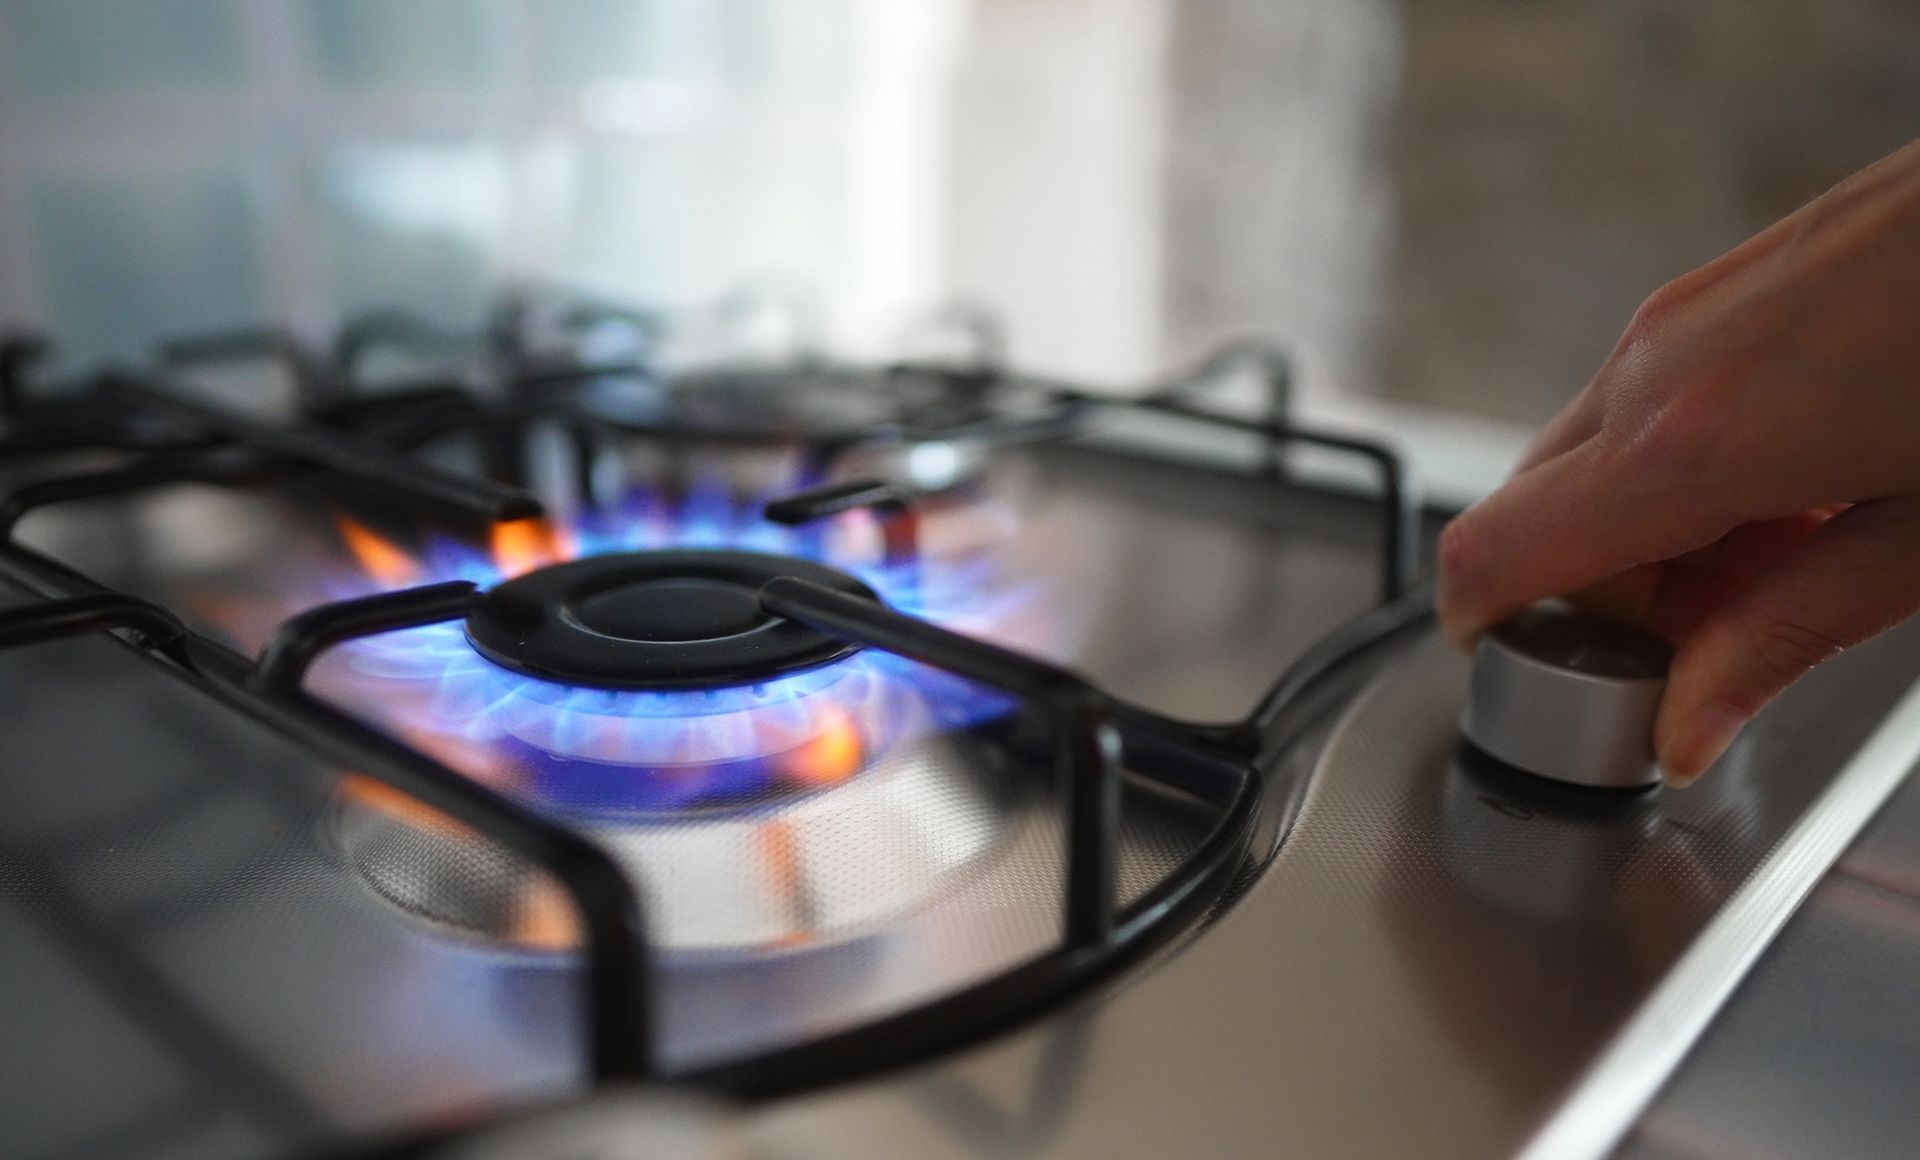 A person is turning the gas burner on a stove.